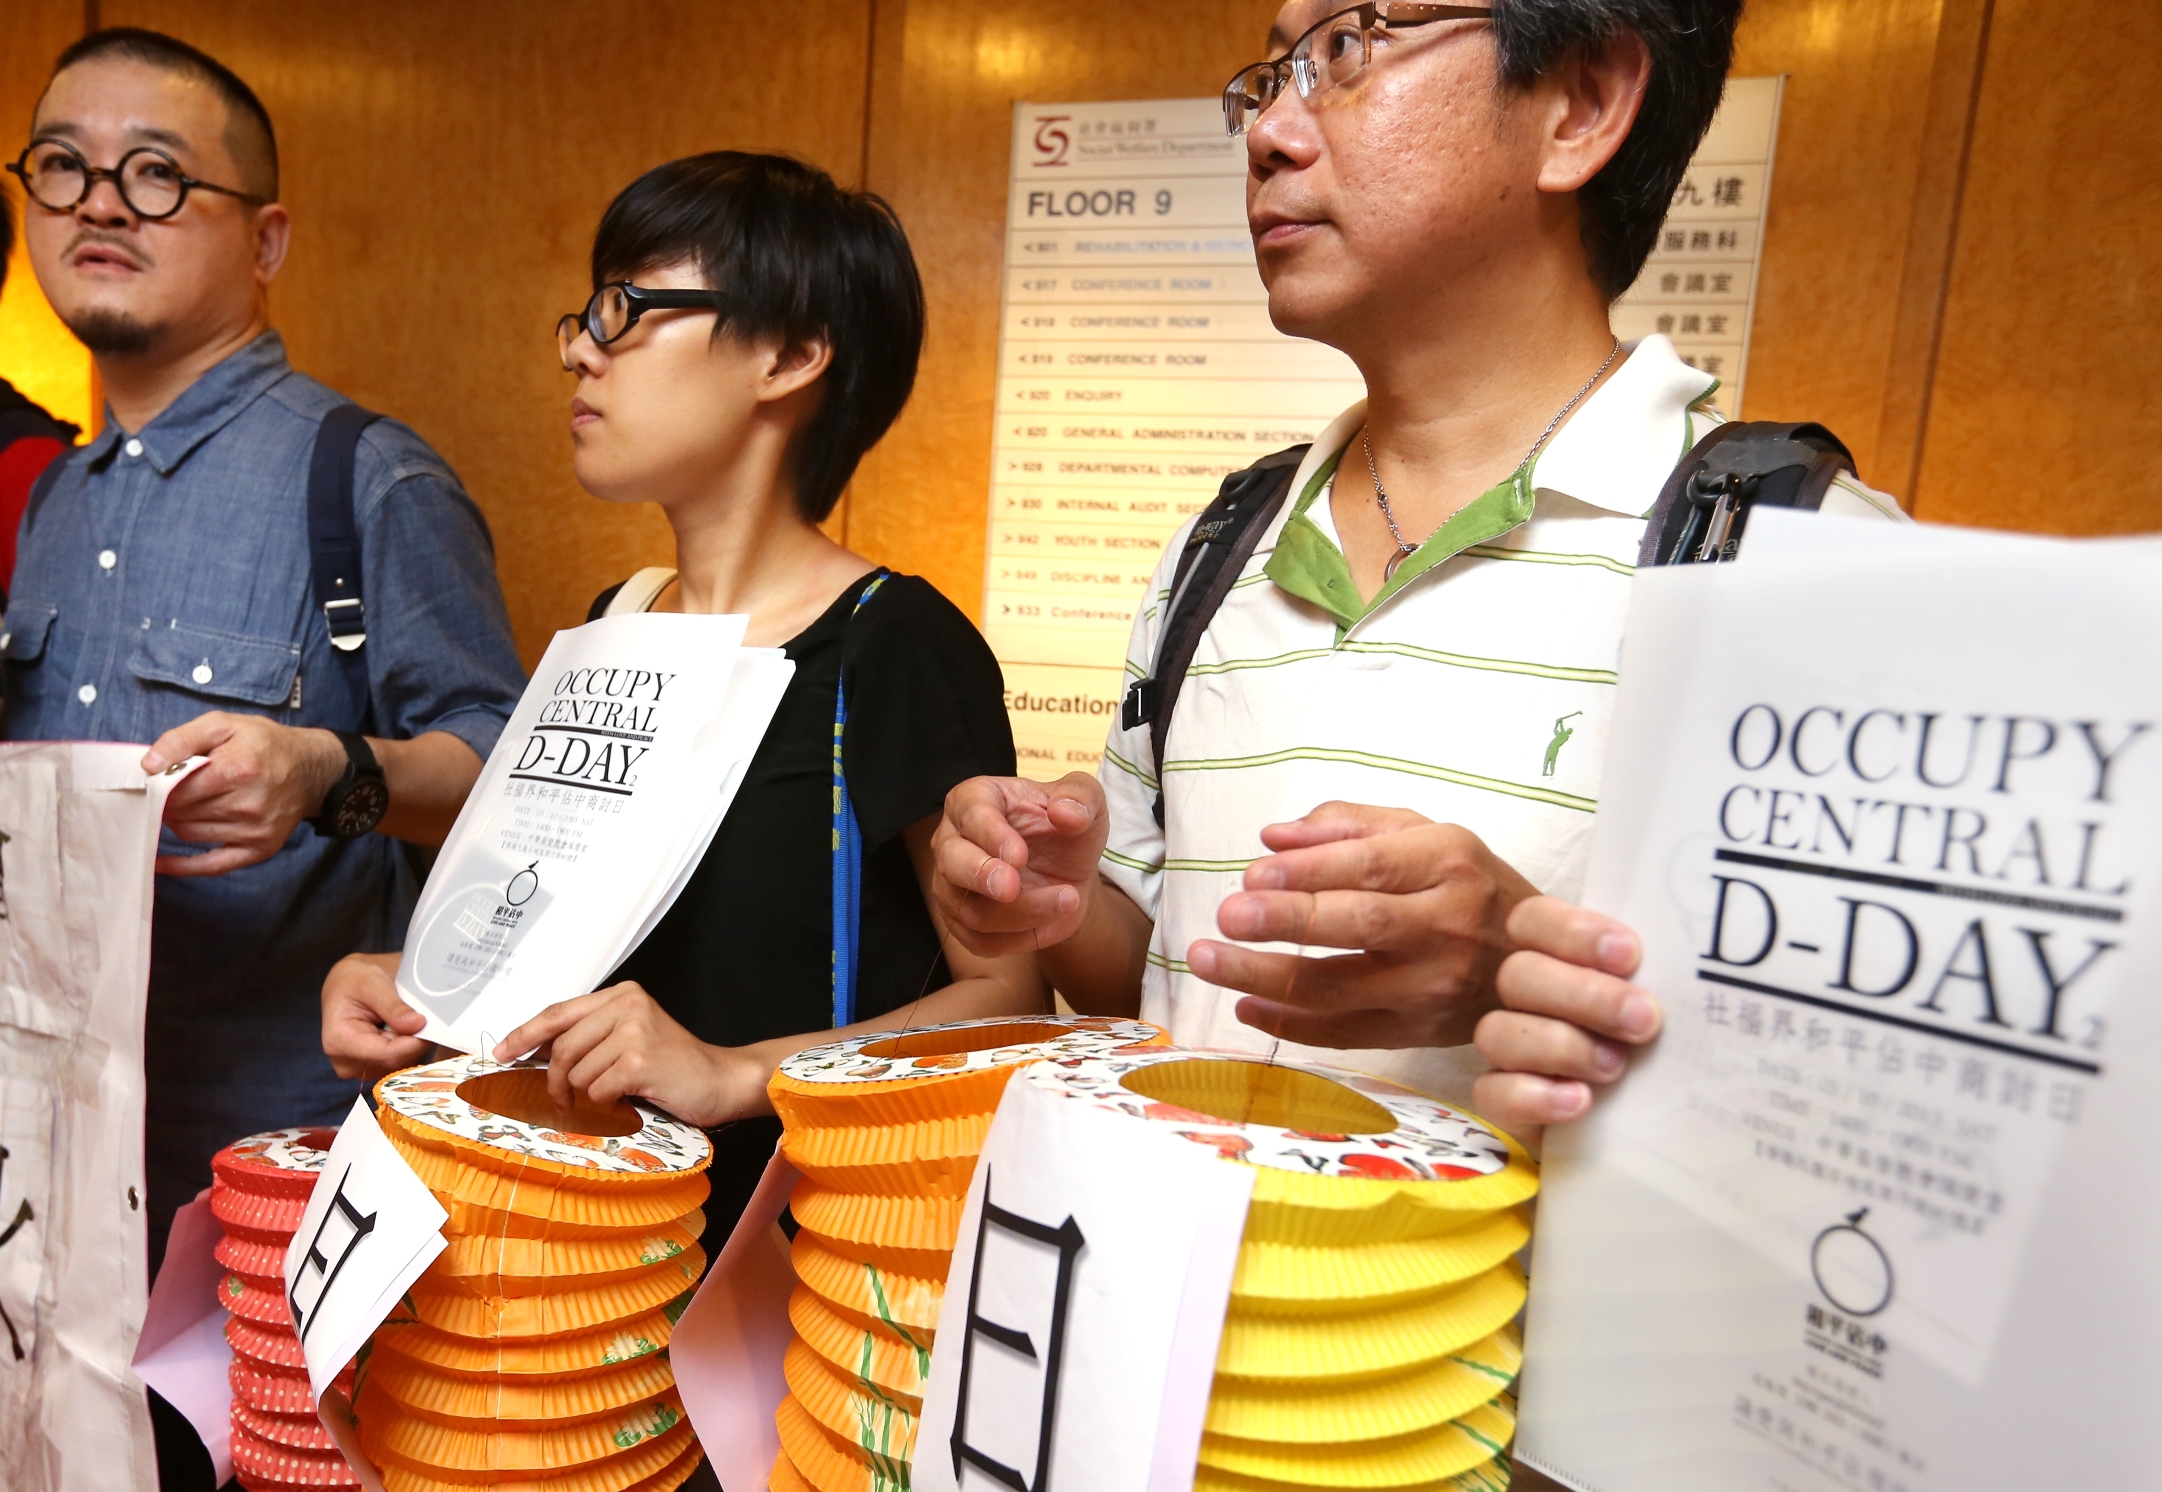  Social workers promote an Occupy Central discussion seminar. Photo: Sam Tsang